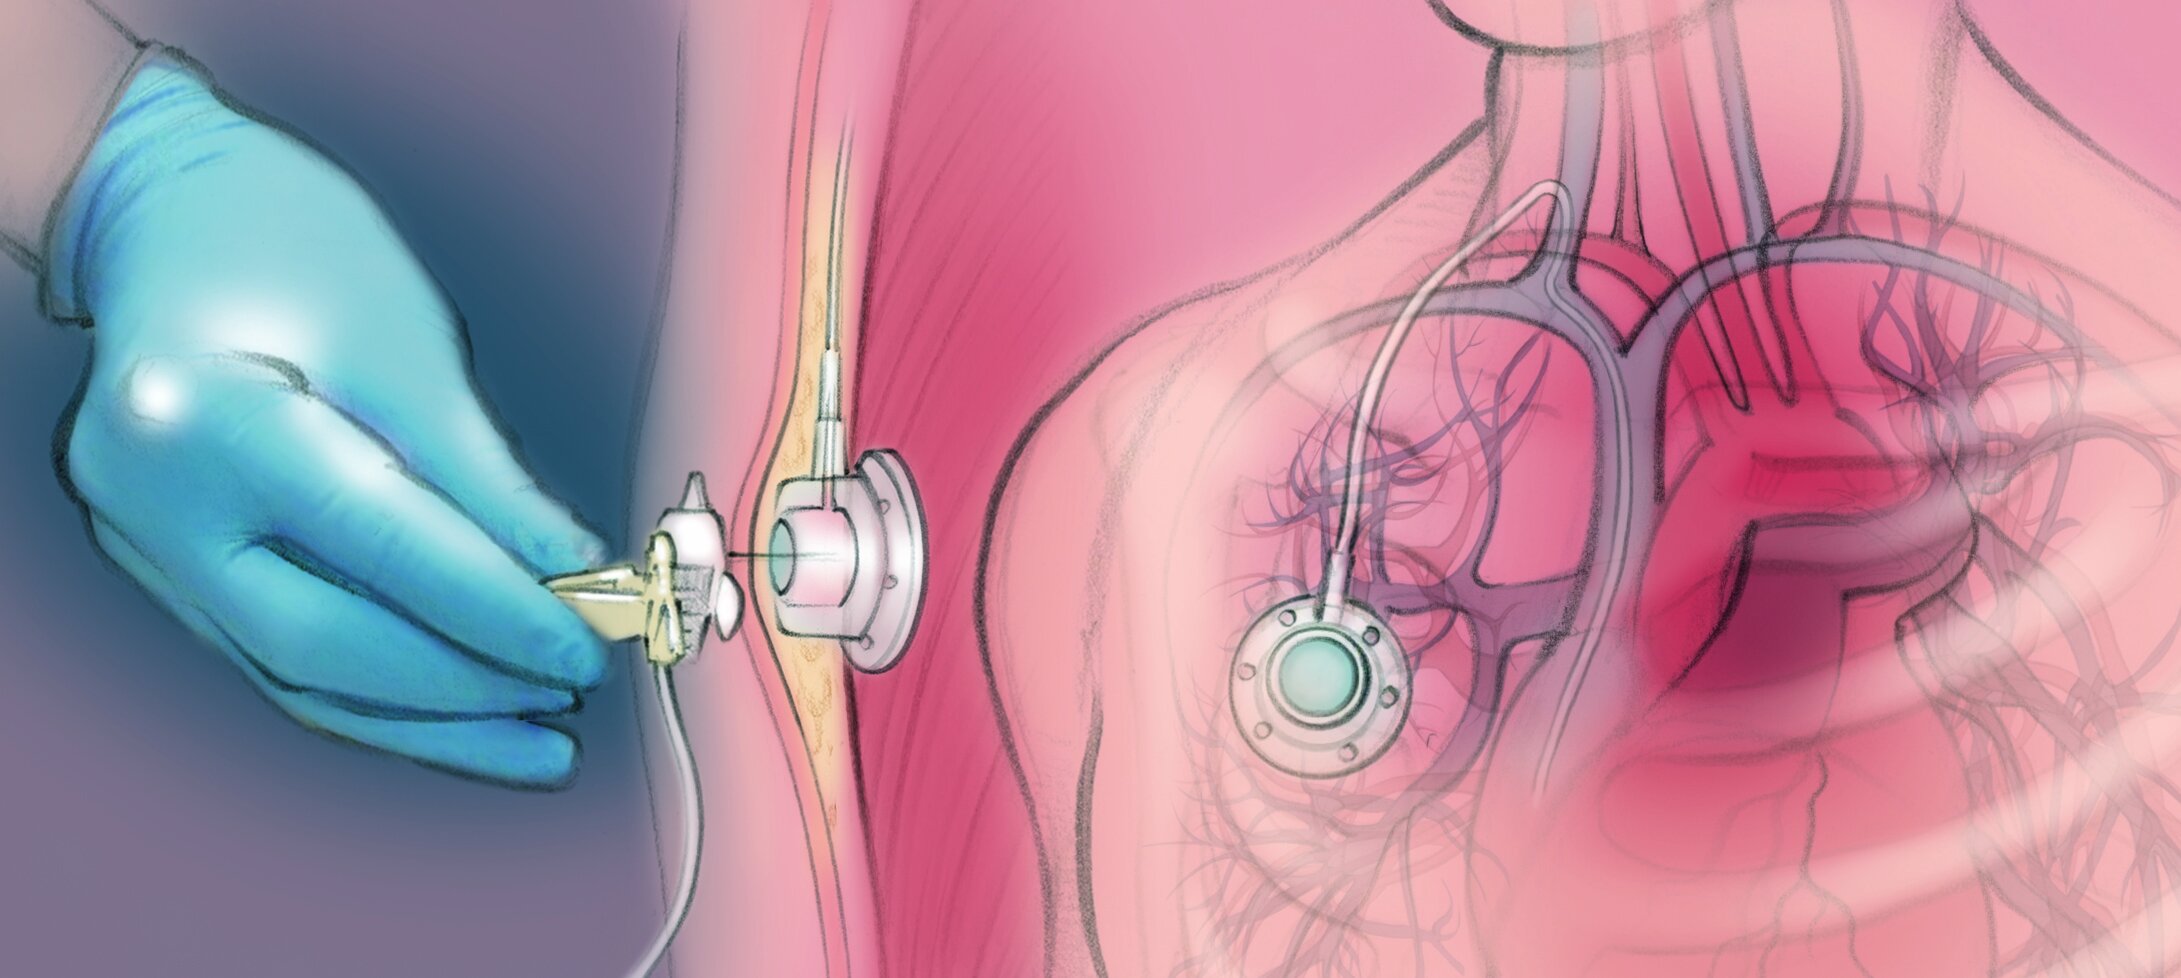 Port Placement — The Interventional Initiative